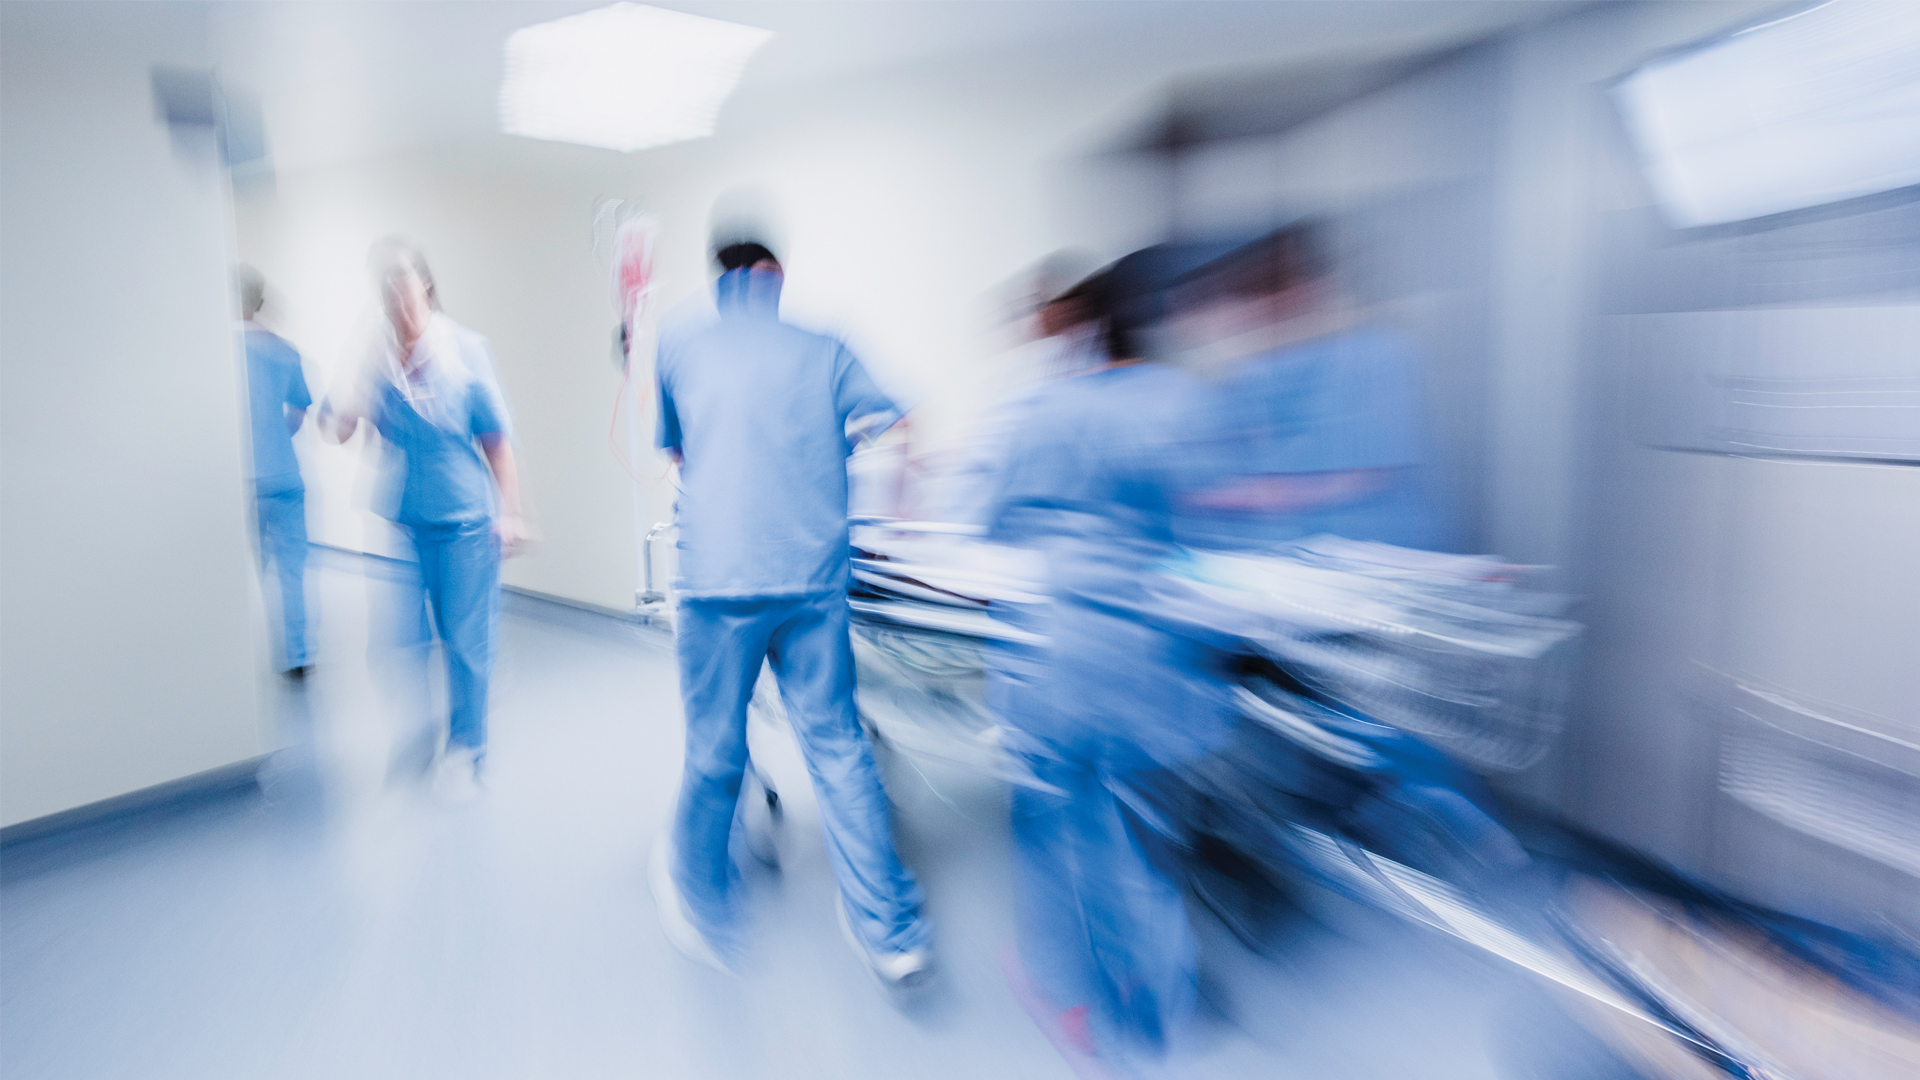 CURE group: what is happening to demand for emergency care?